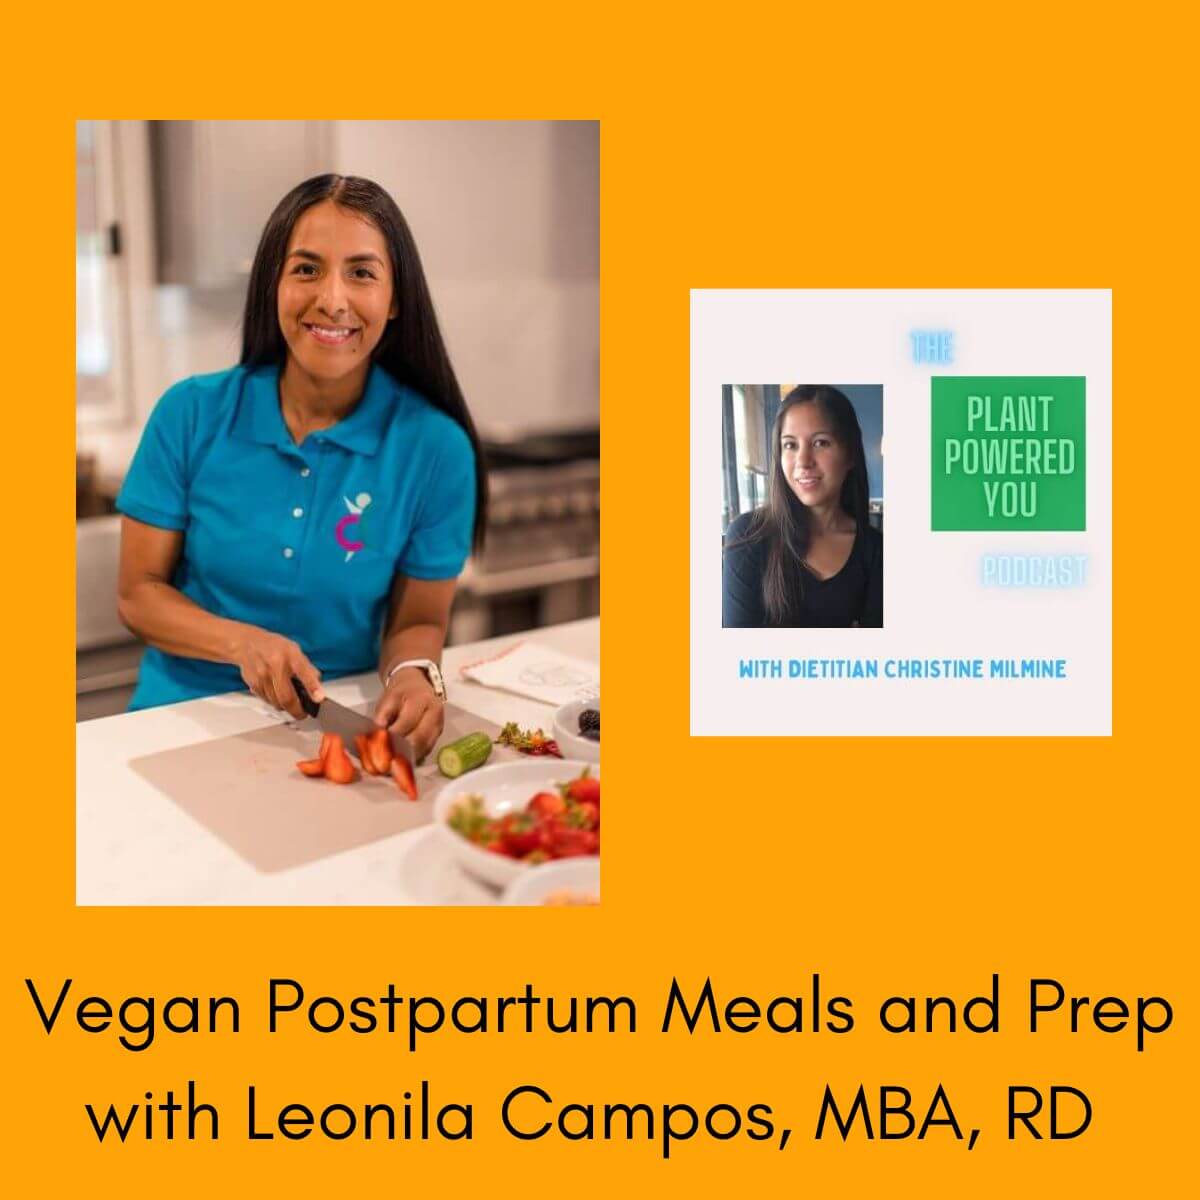 Title reads: Vegan Postpartum Meals and Prep with Leonila Campos, MBA, RD. There is an image of Leonila cutting up strawberries. Beside that image is a picture of Christine with the words: the Plant Powered You Podcast with dietitian Christine Milmine.